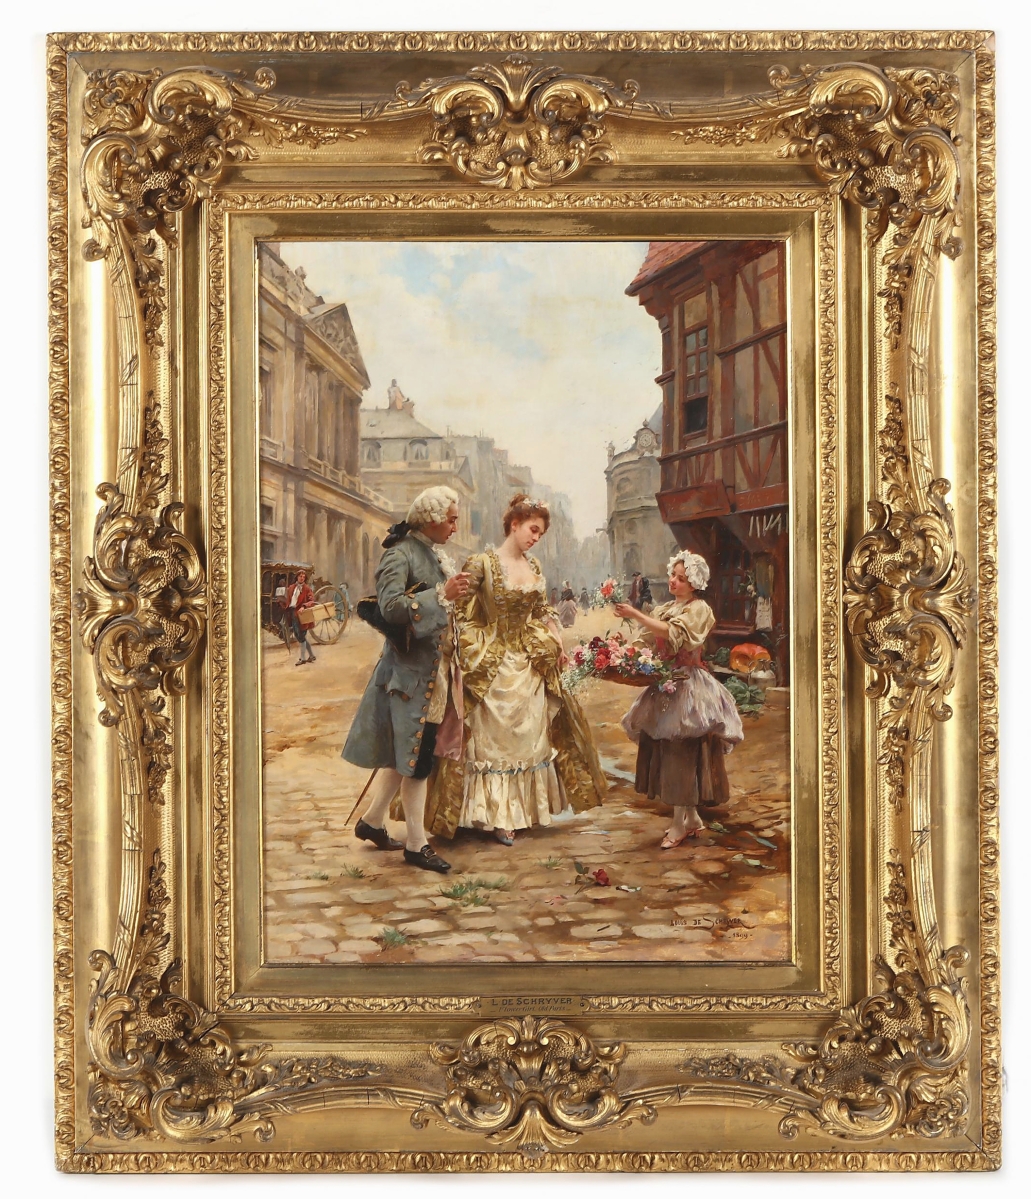 “It was gorgeous, just stunning. There was great depth and detail in the picture,” fine art specialist Claire Frasier said of “Flower Girl, Old Paris” by Louis Marie de Schryver (French, 1862-1942). It had been consigned from a private North Carolina collector but will be leaving the state having sold to a phone bidder from California for $43,200 ($20/40,000).